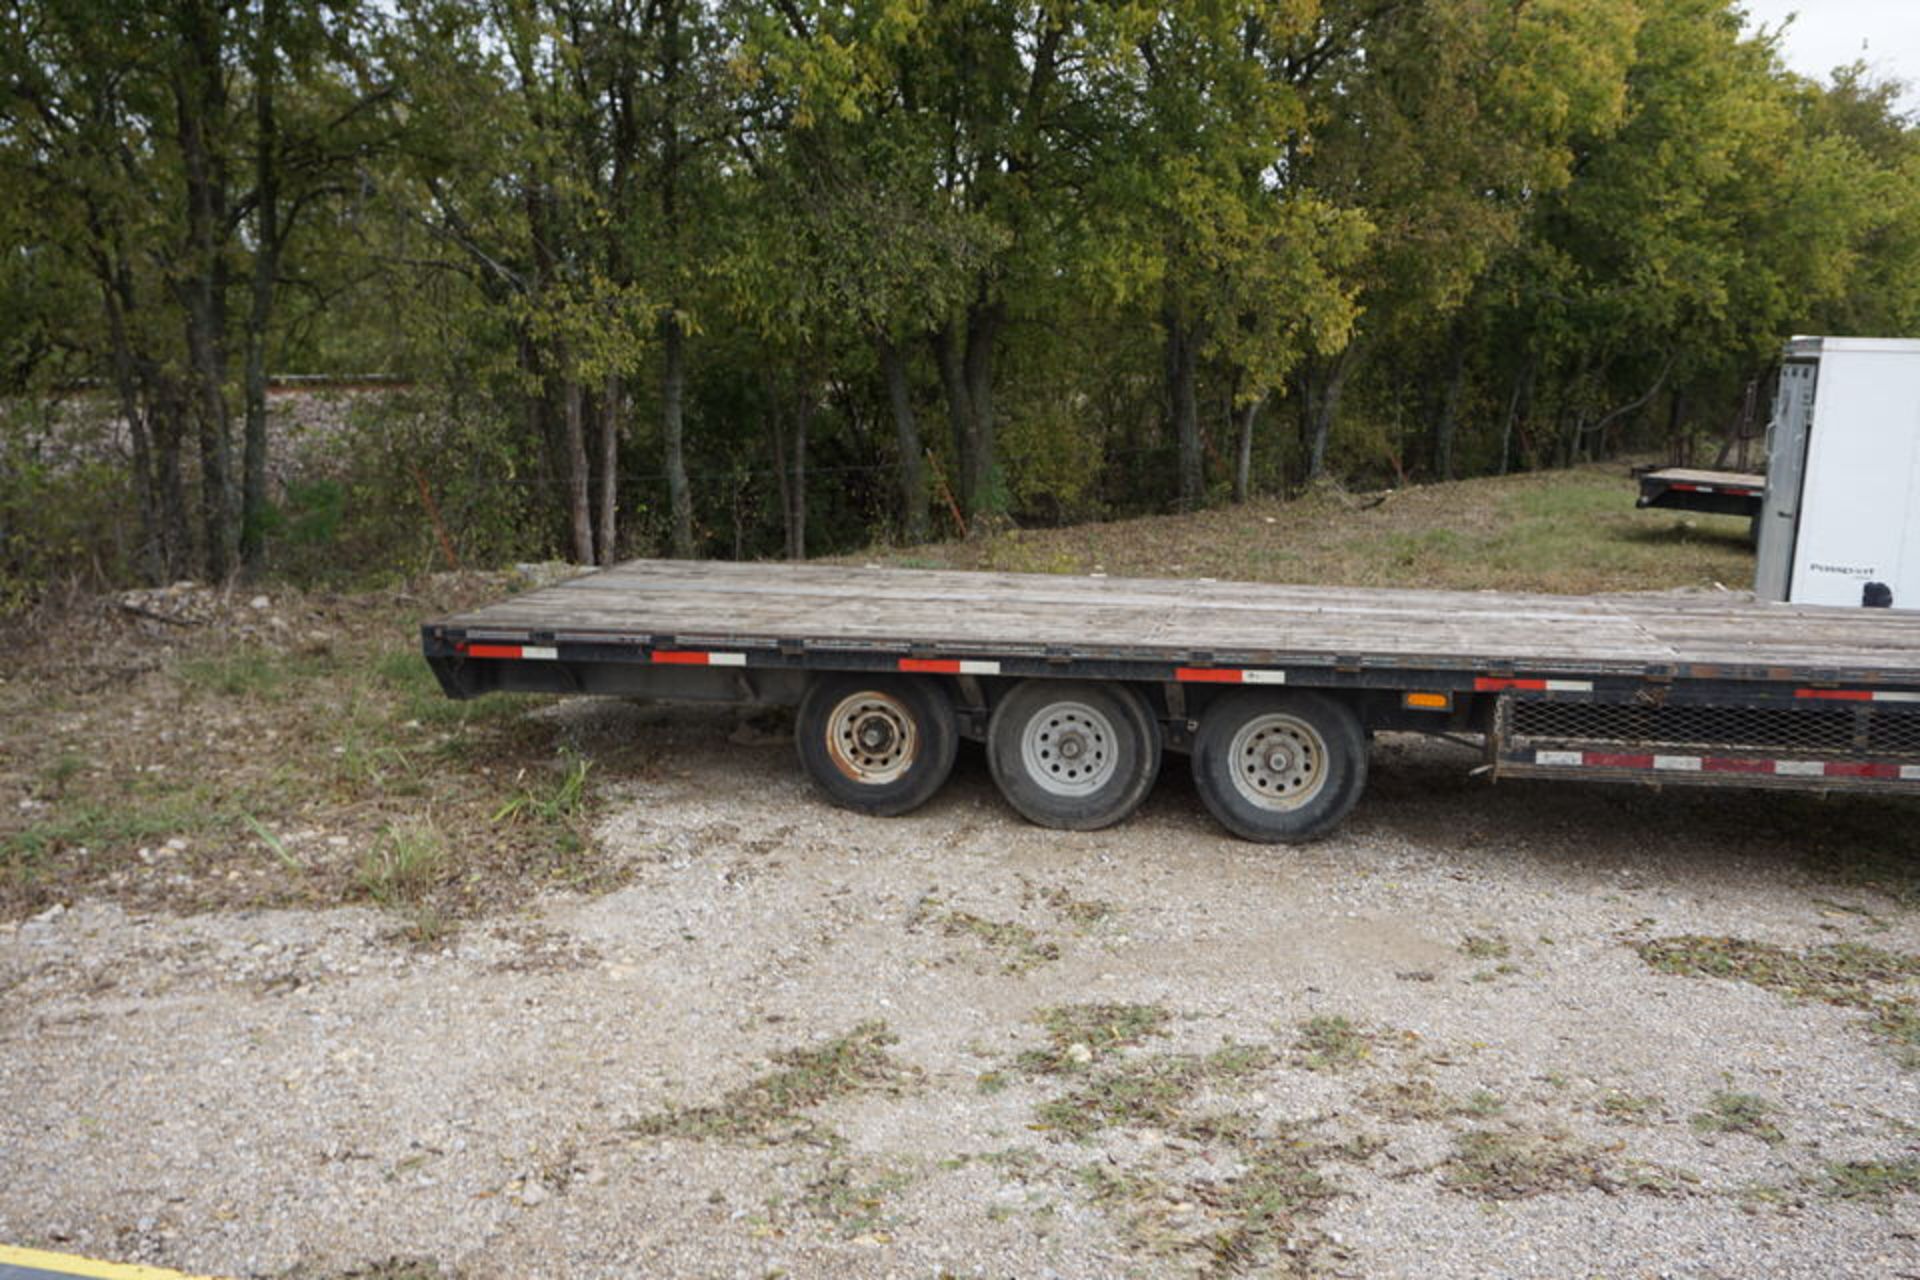 2012 8' x 30' WILD WEST GOOSE NECK TRAILER, MAX LOAD: 26,000 LBS (MUST BE REMOVED BY DECEMBER 22) - Image 4 of 8